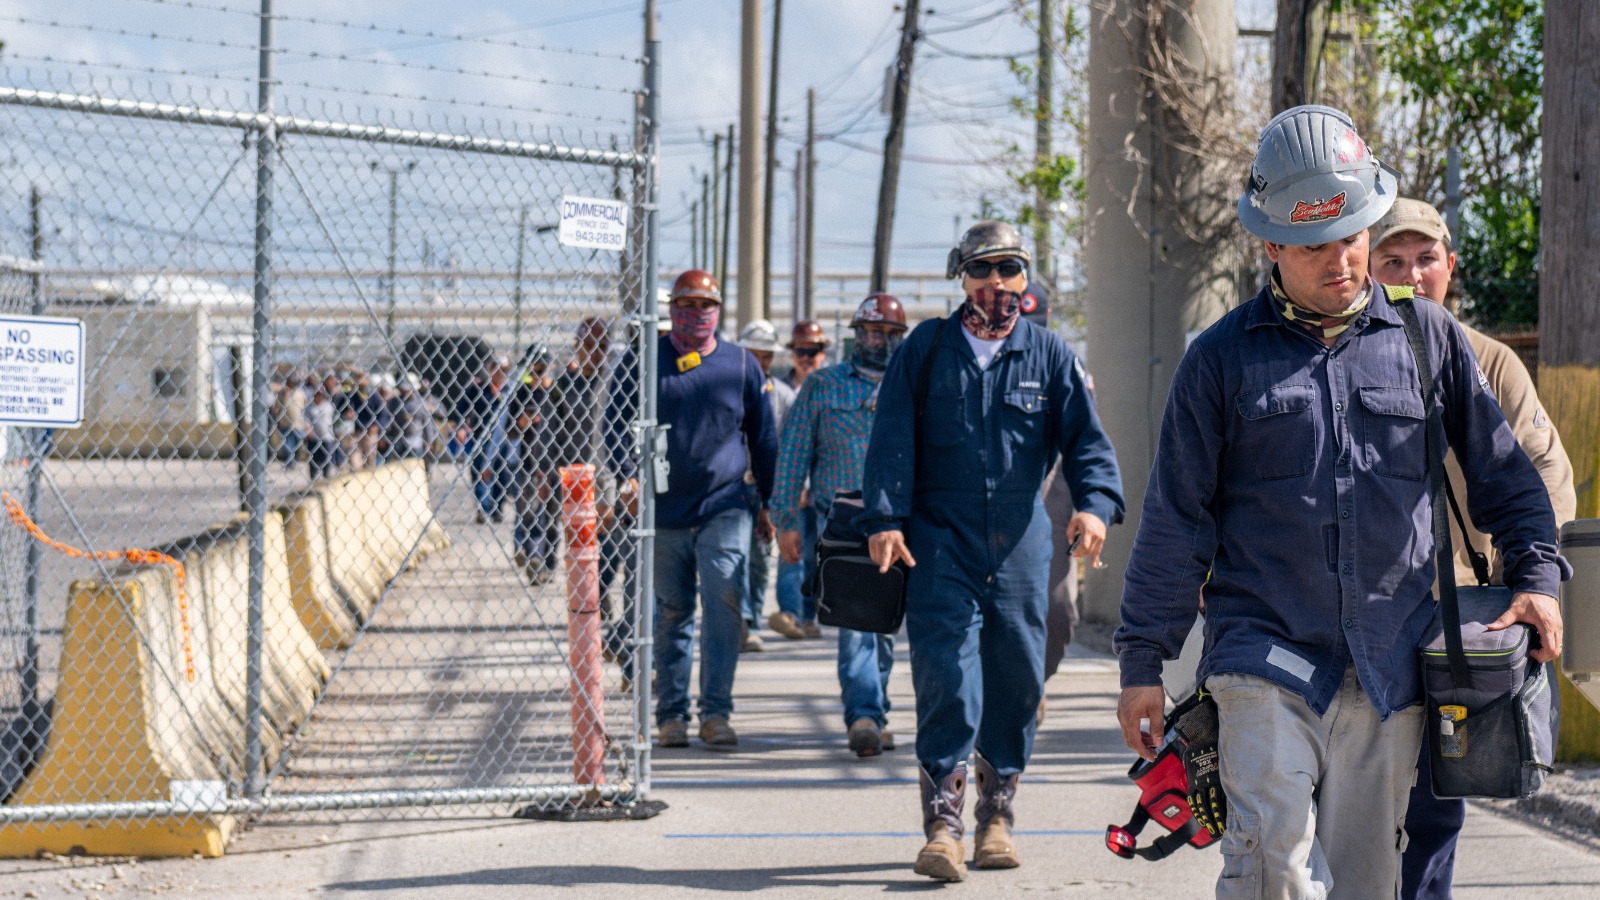 Men in hard hats and boots exit an industrial area in a line.